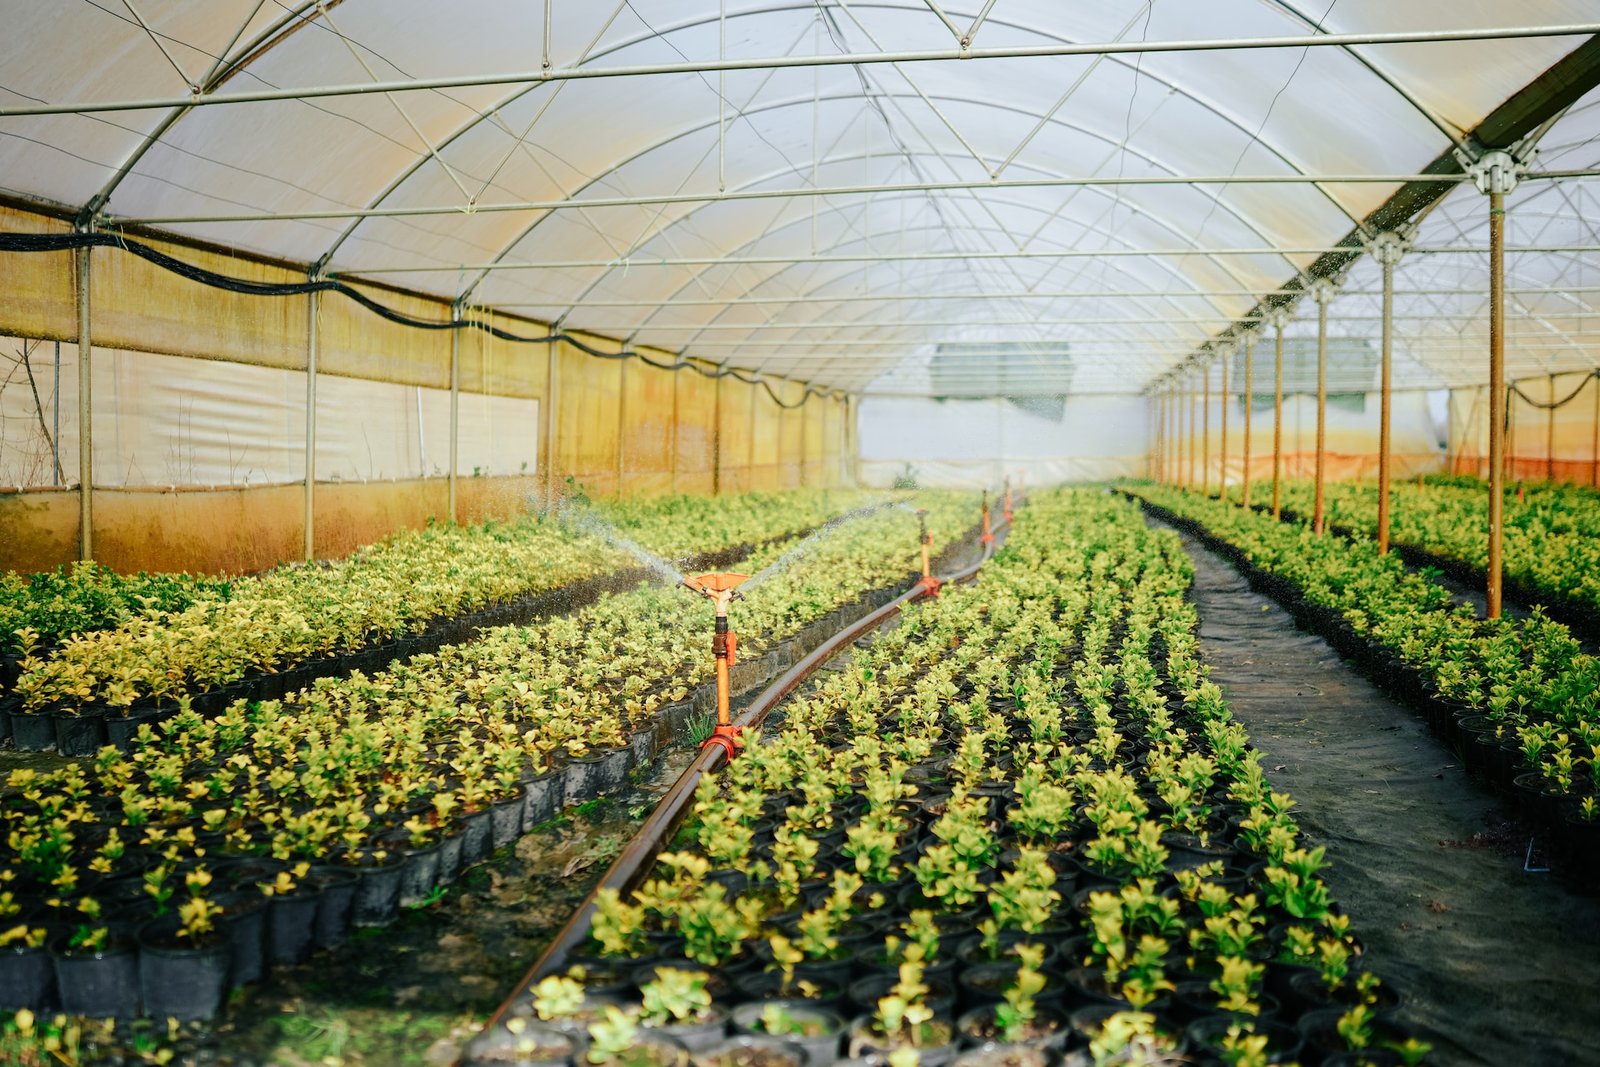 The Ultimate Crop Defender: Explore the Impact of Greenhouse Plastic Covers in Agriculture